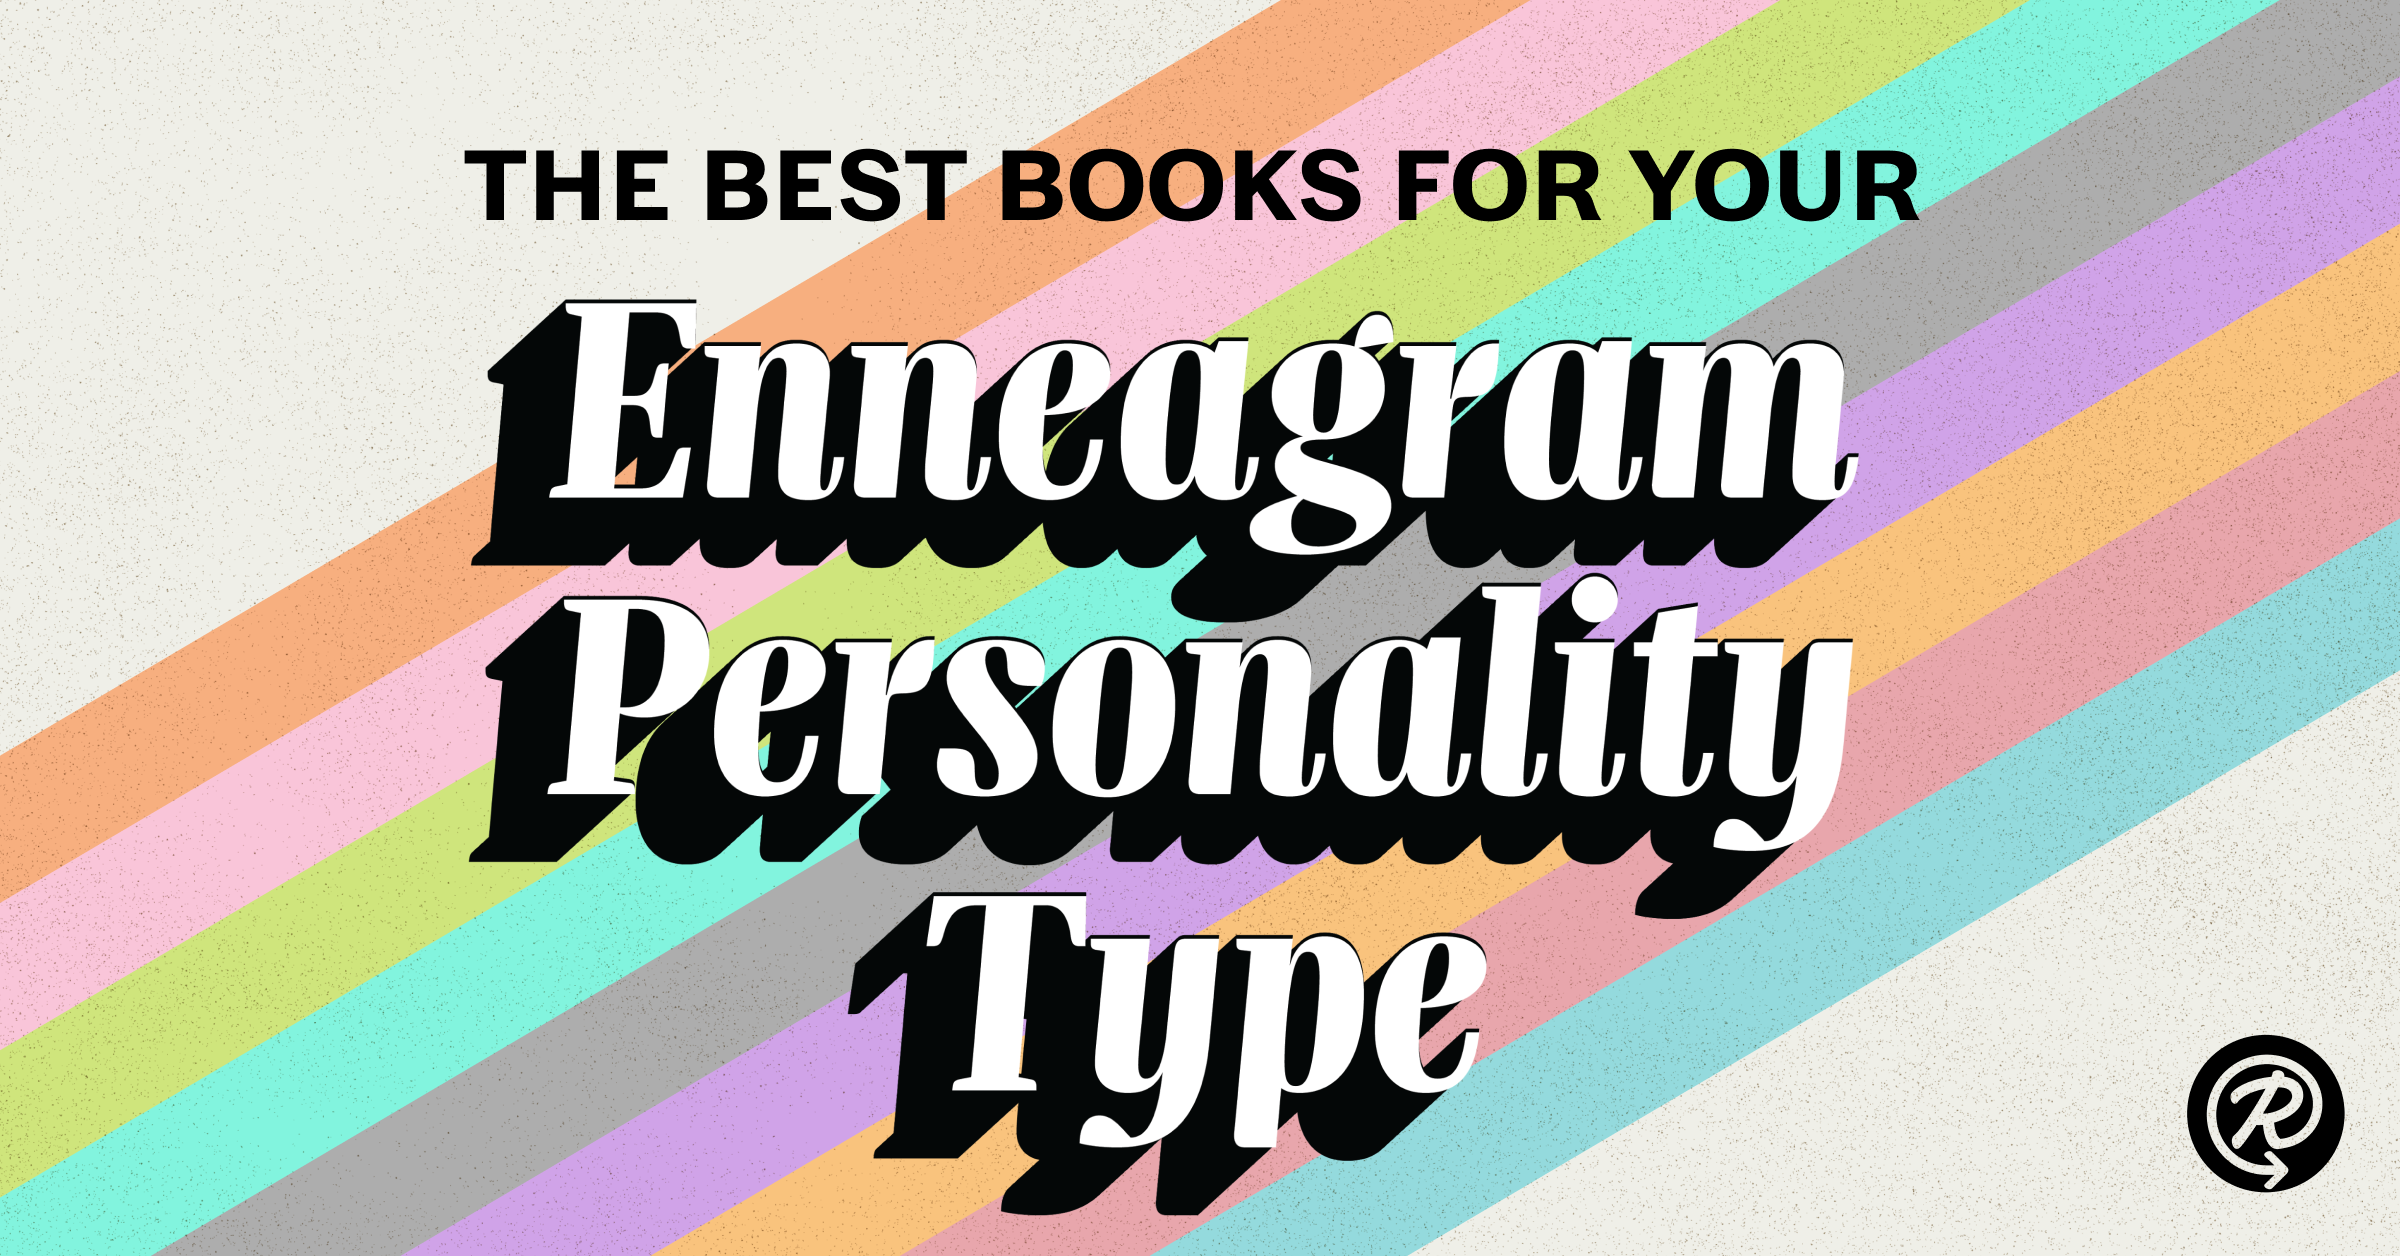 The Best Books for Your Enneagram Type